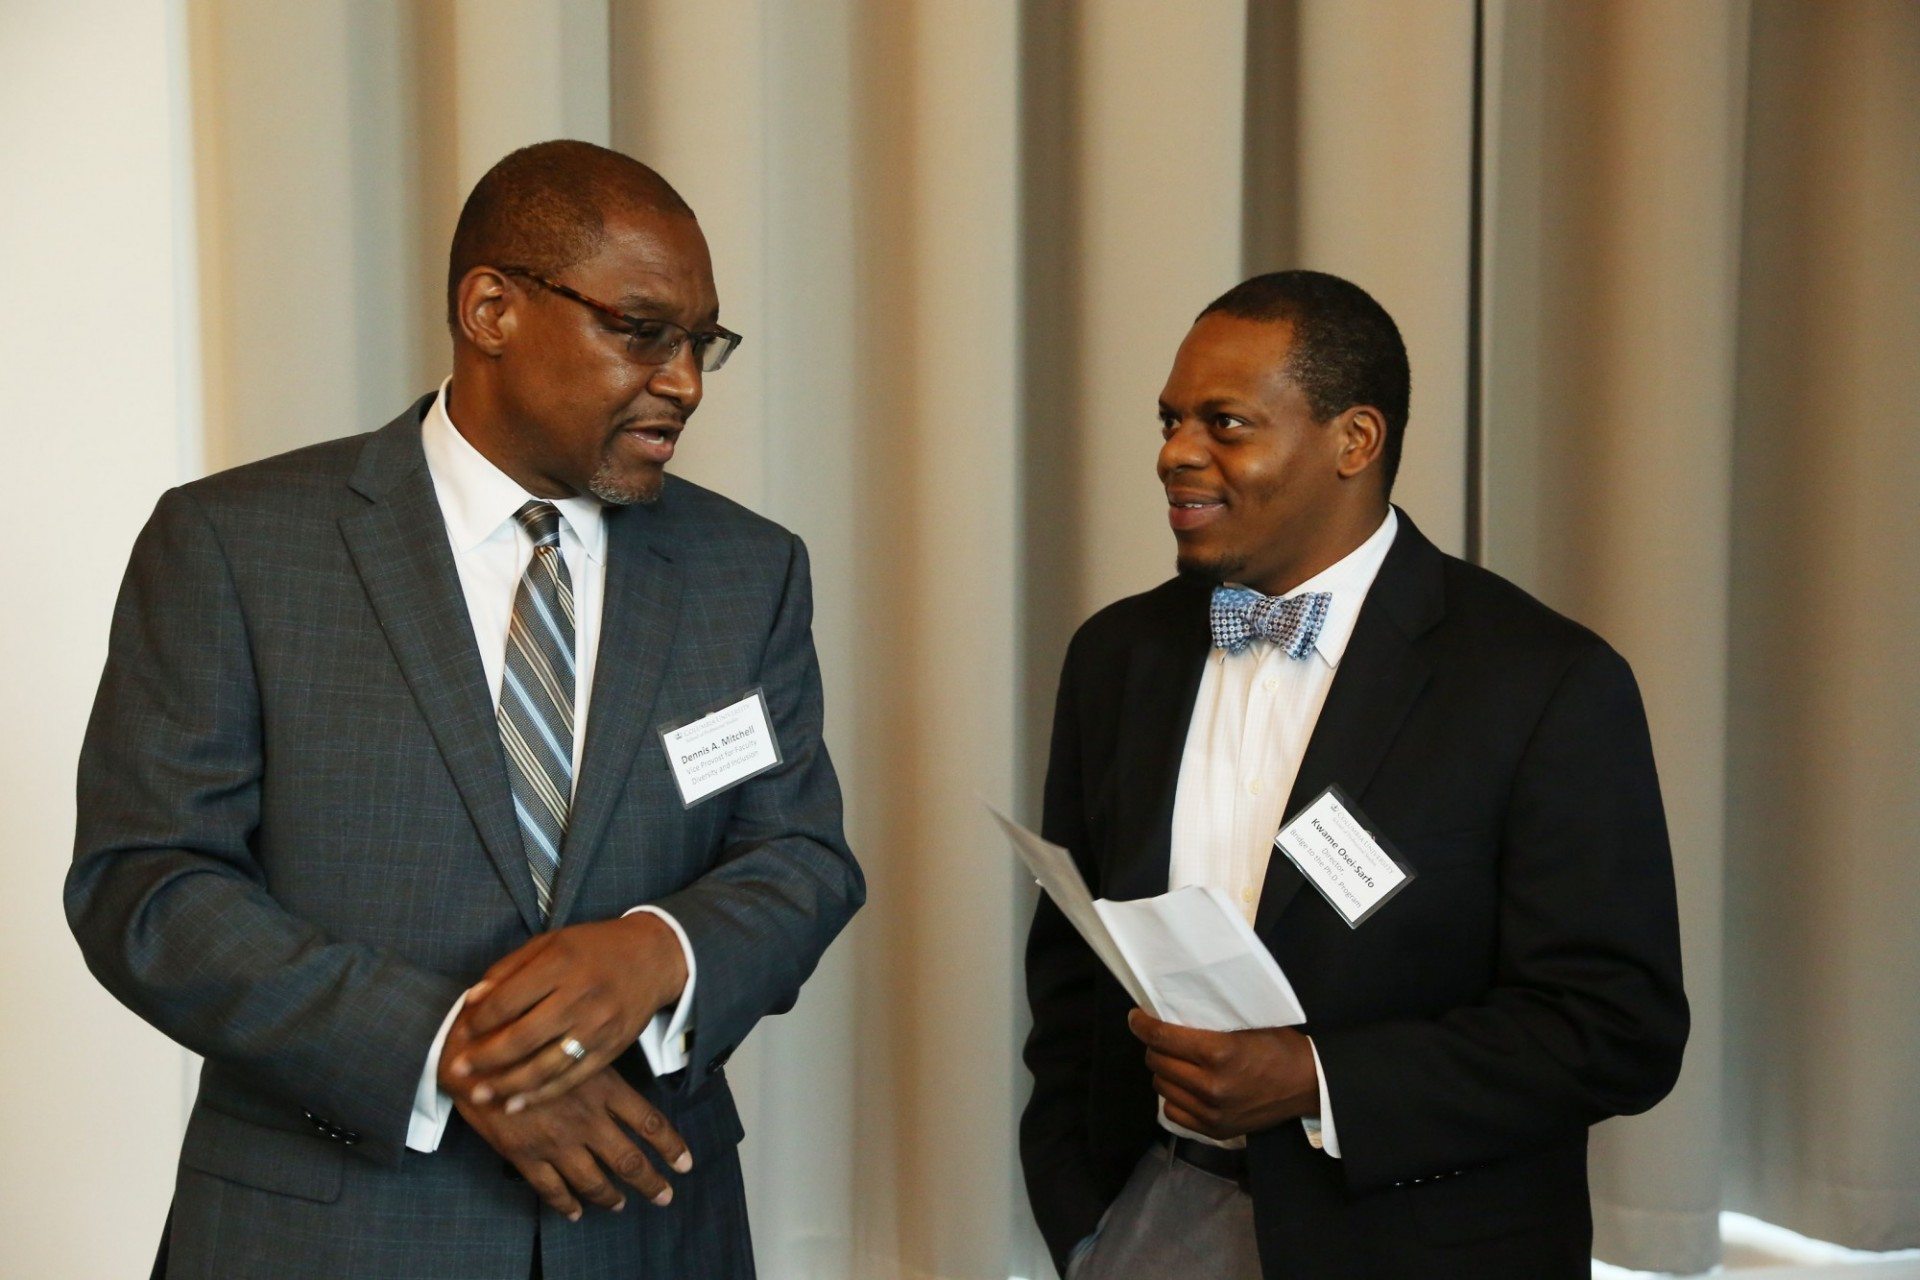 Dennis Mitchell, Vice Provost for Faculty Diversity and Inclusion and Kwame Osei-Sarfo, Director, Bridge to the Ph.D. Program